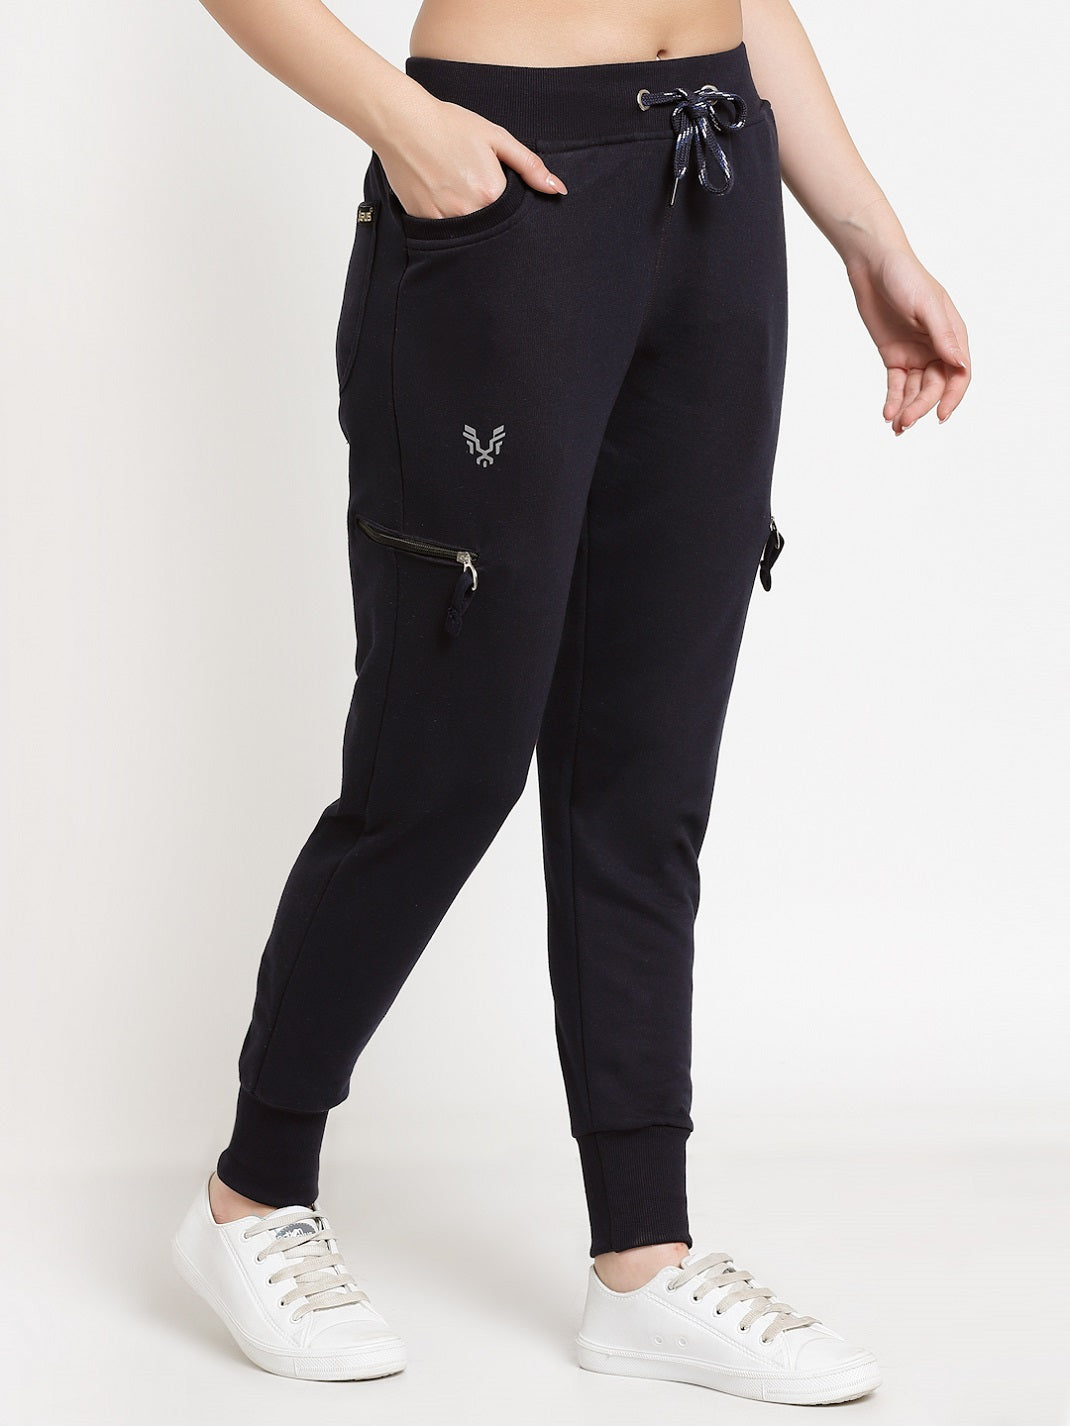 Buy online Black Cotton Joggers from bottom wear for Women by Rigo